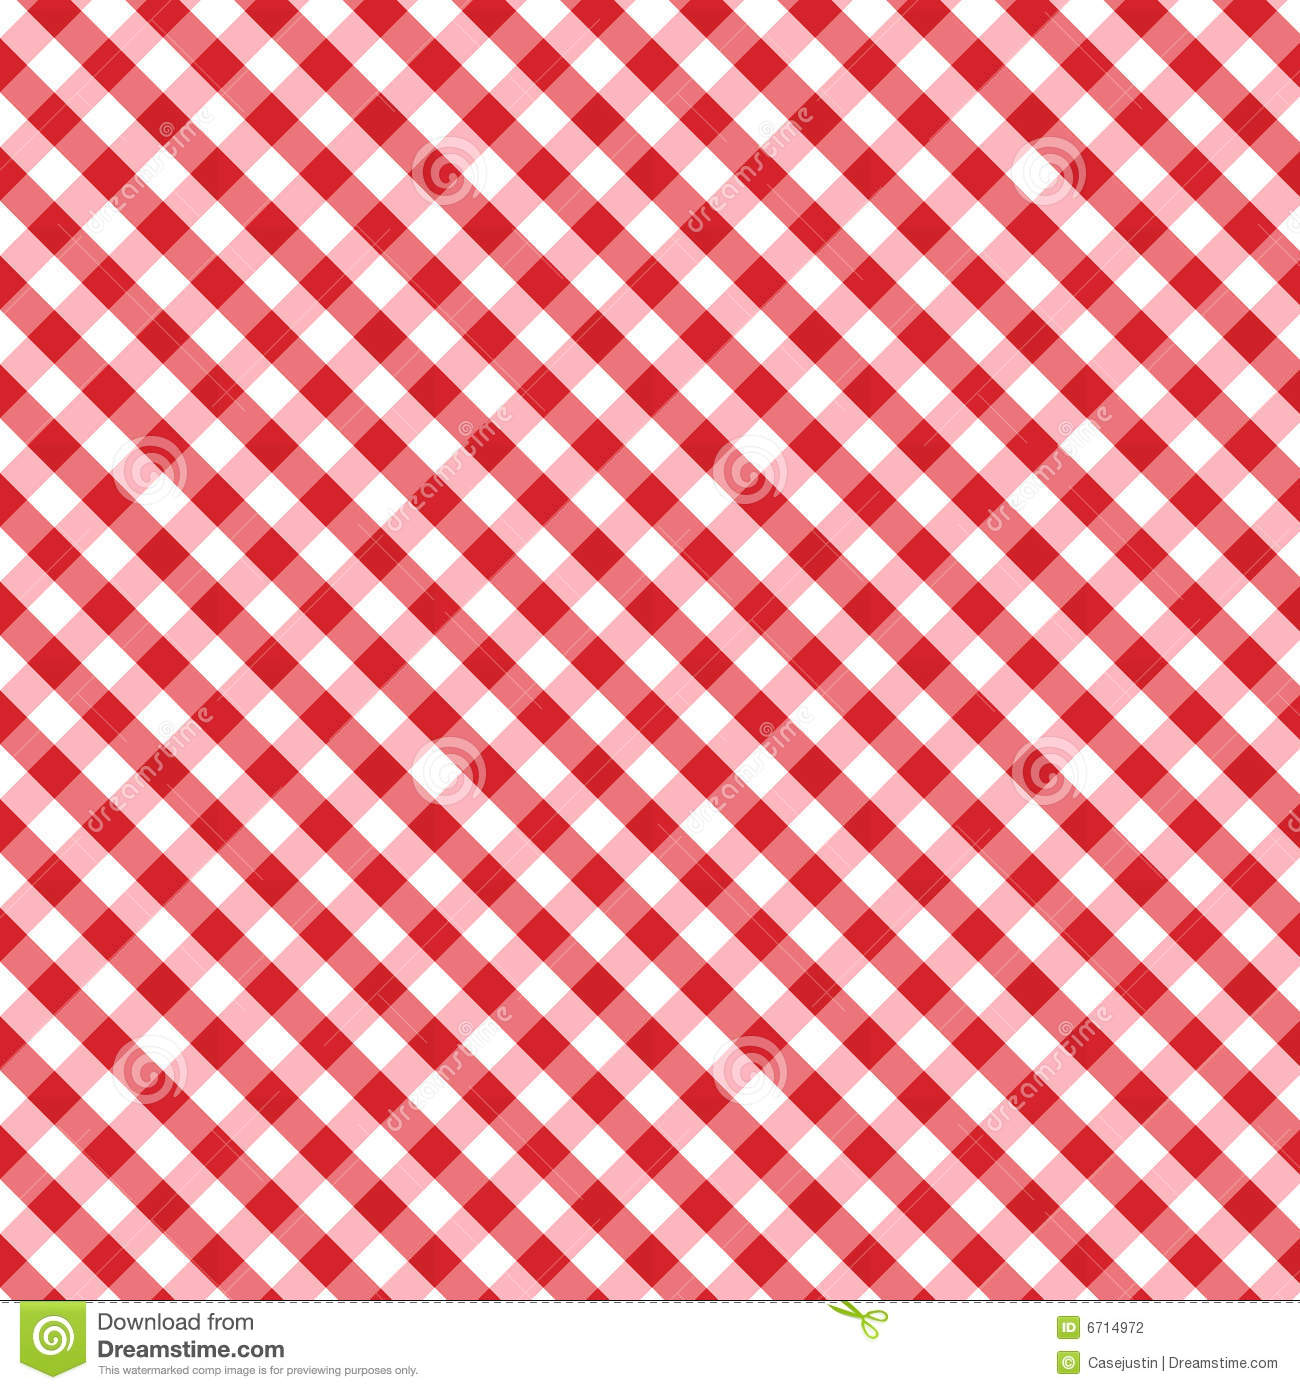 Red Gingham Wallpaper   HD Wallpapers and Pictures